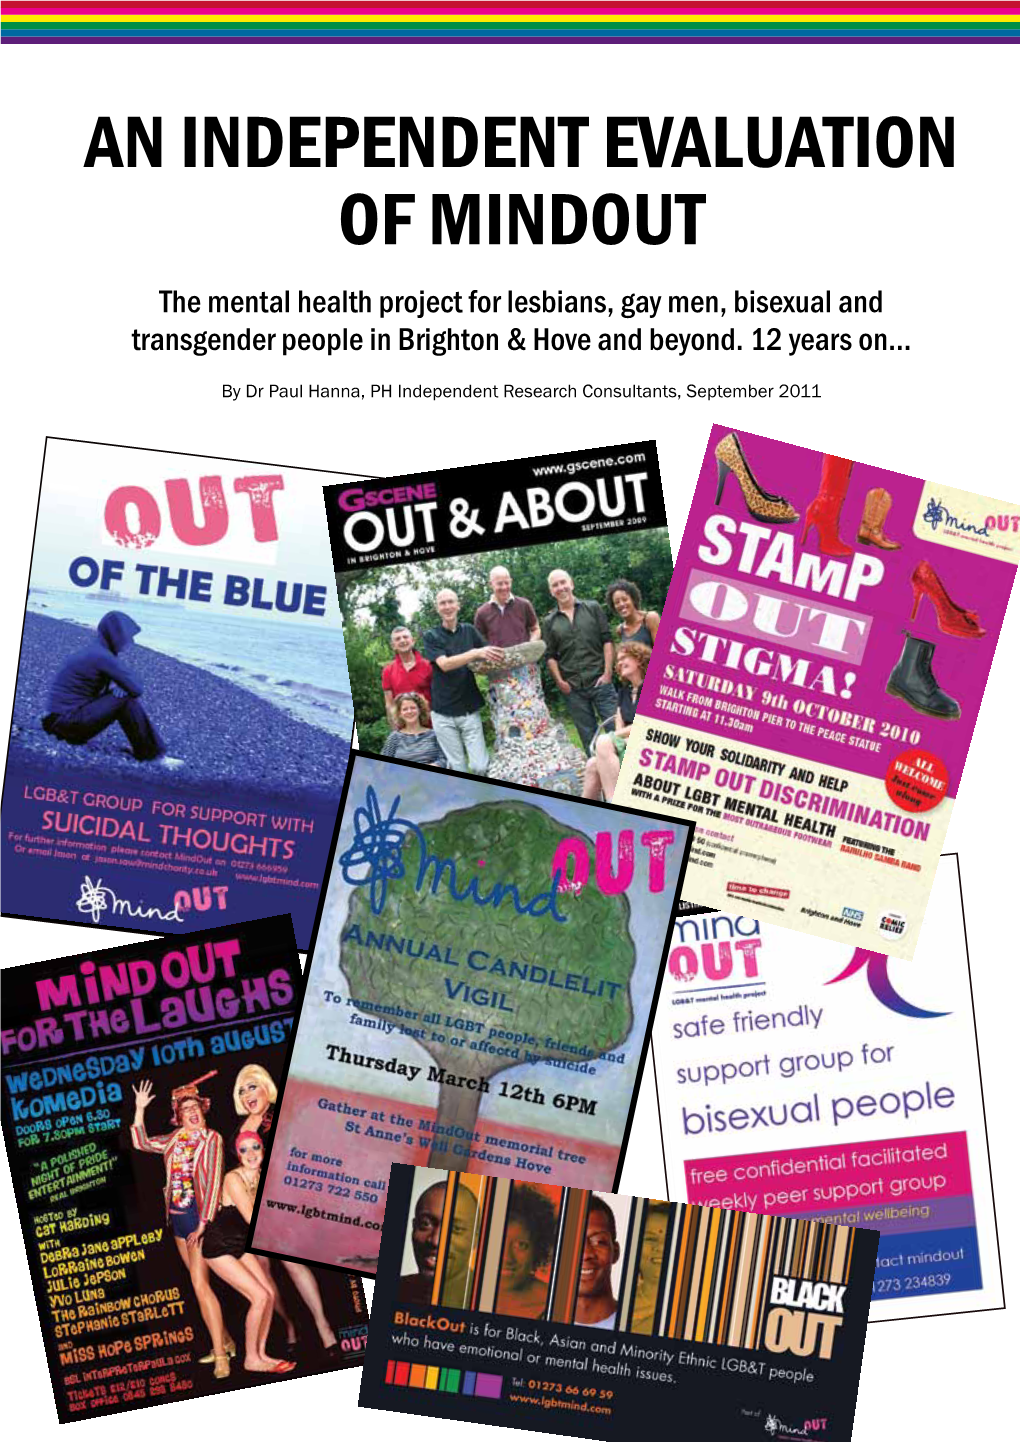 AN INDEPENDENT EVALUATION of MINDOUT the Mental Health Project for Lesbians, Gay Men, Bisexual and Transgender People in Brighton & Hove and Beyond